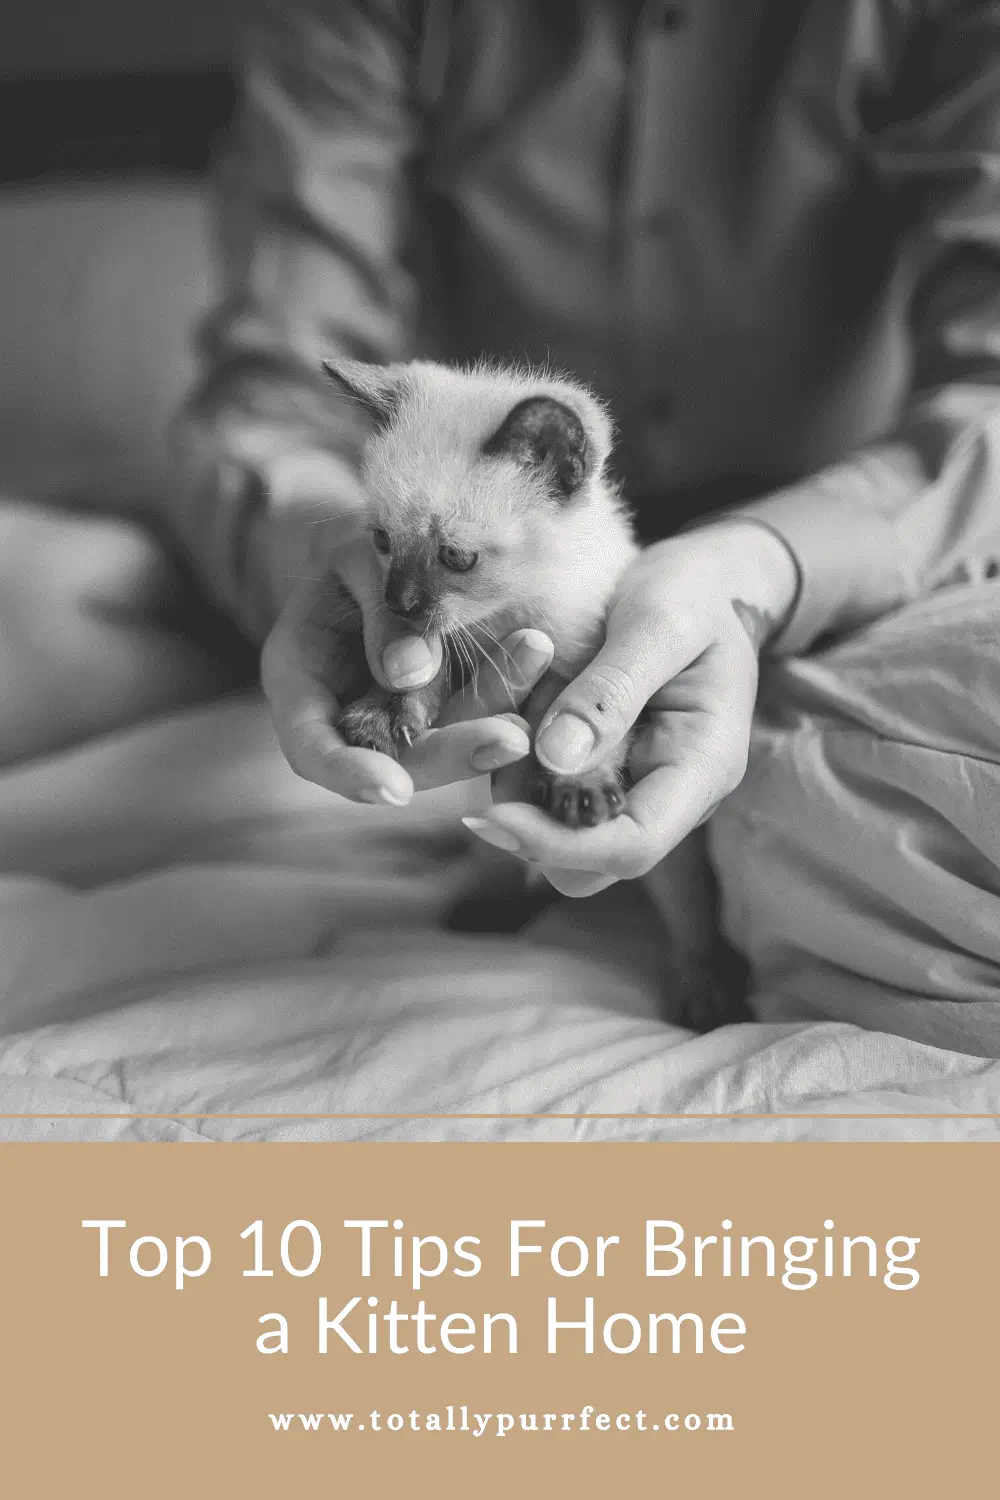 Tips For Bringing a Kitten Home